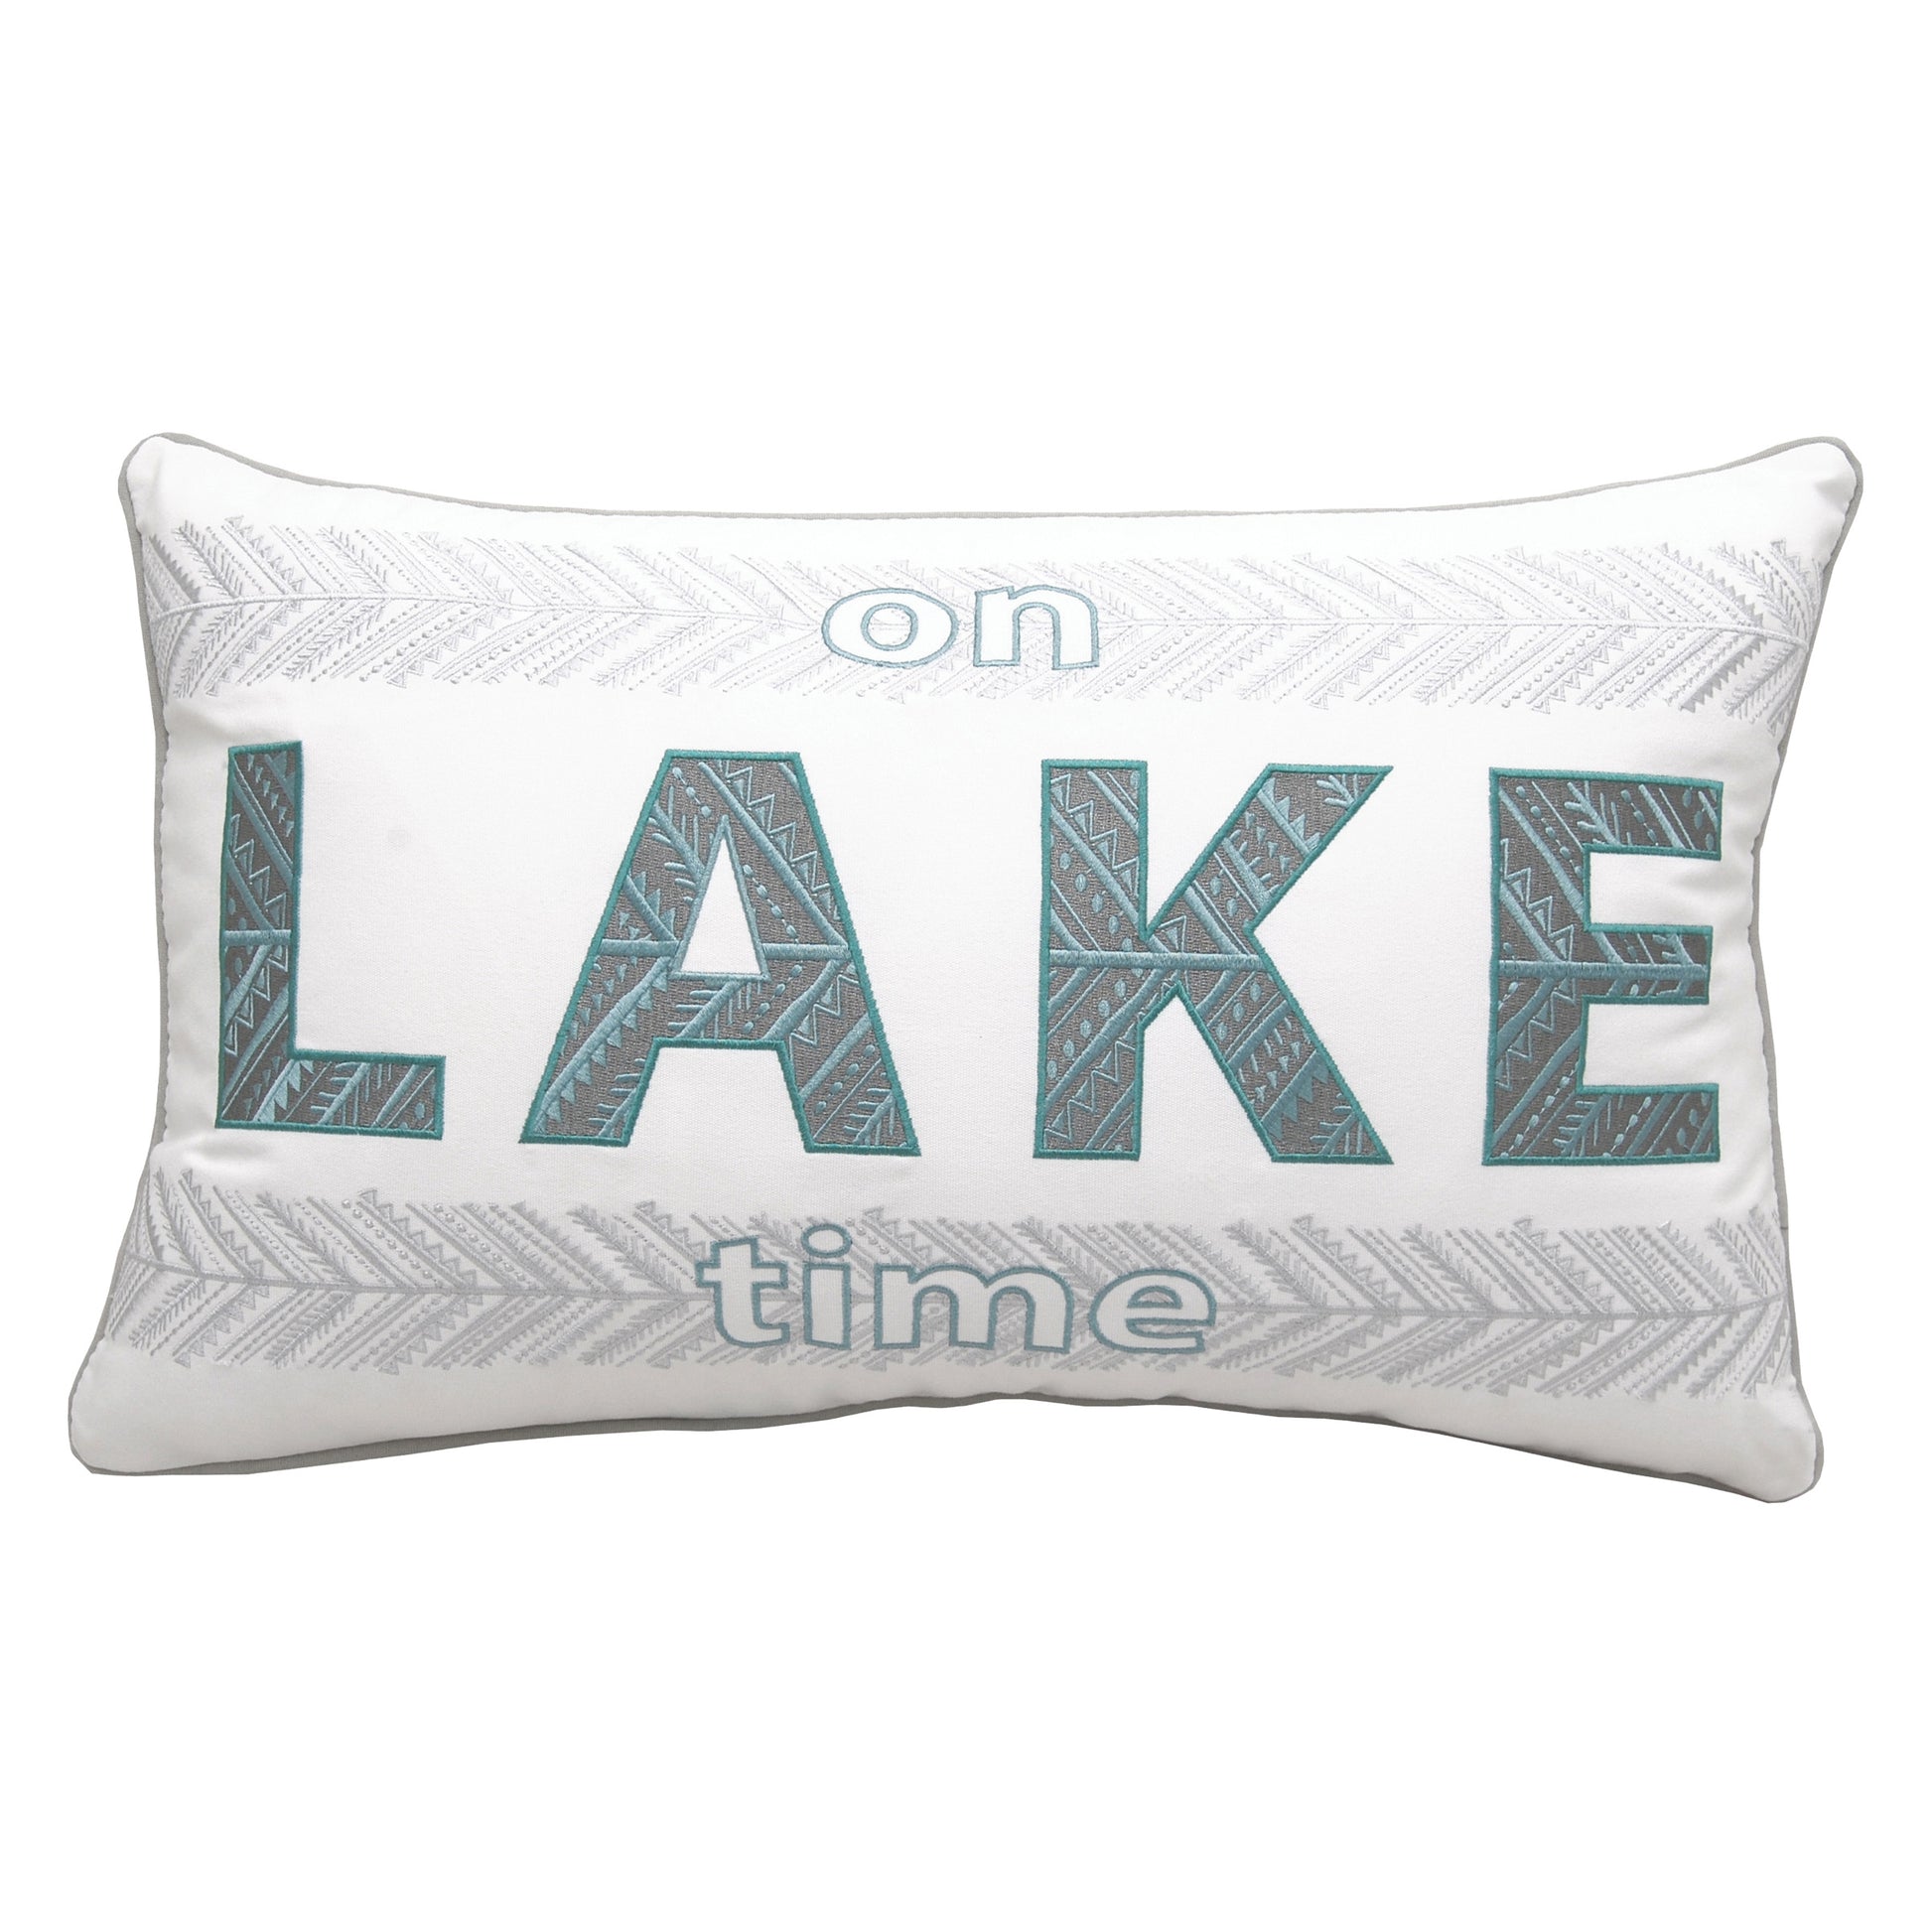 The sentiment "On Lake Time" embroidered in teal and grey on a white background.